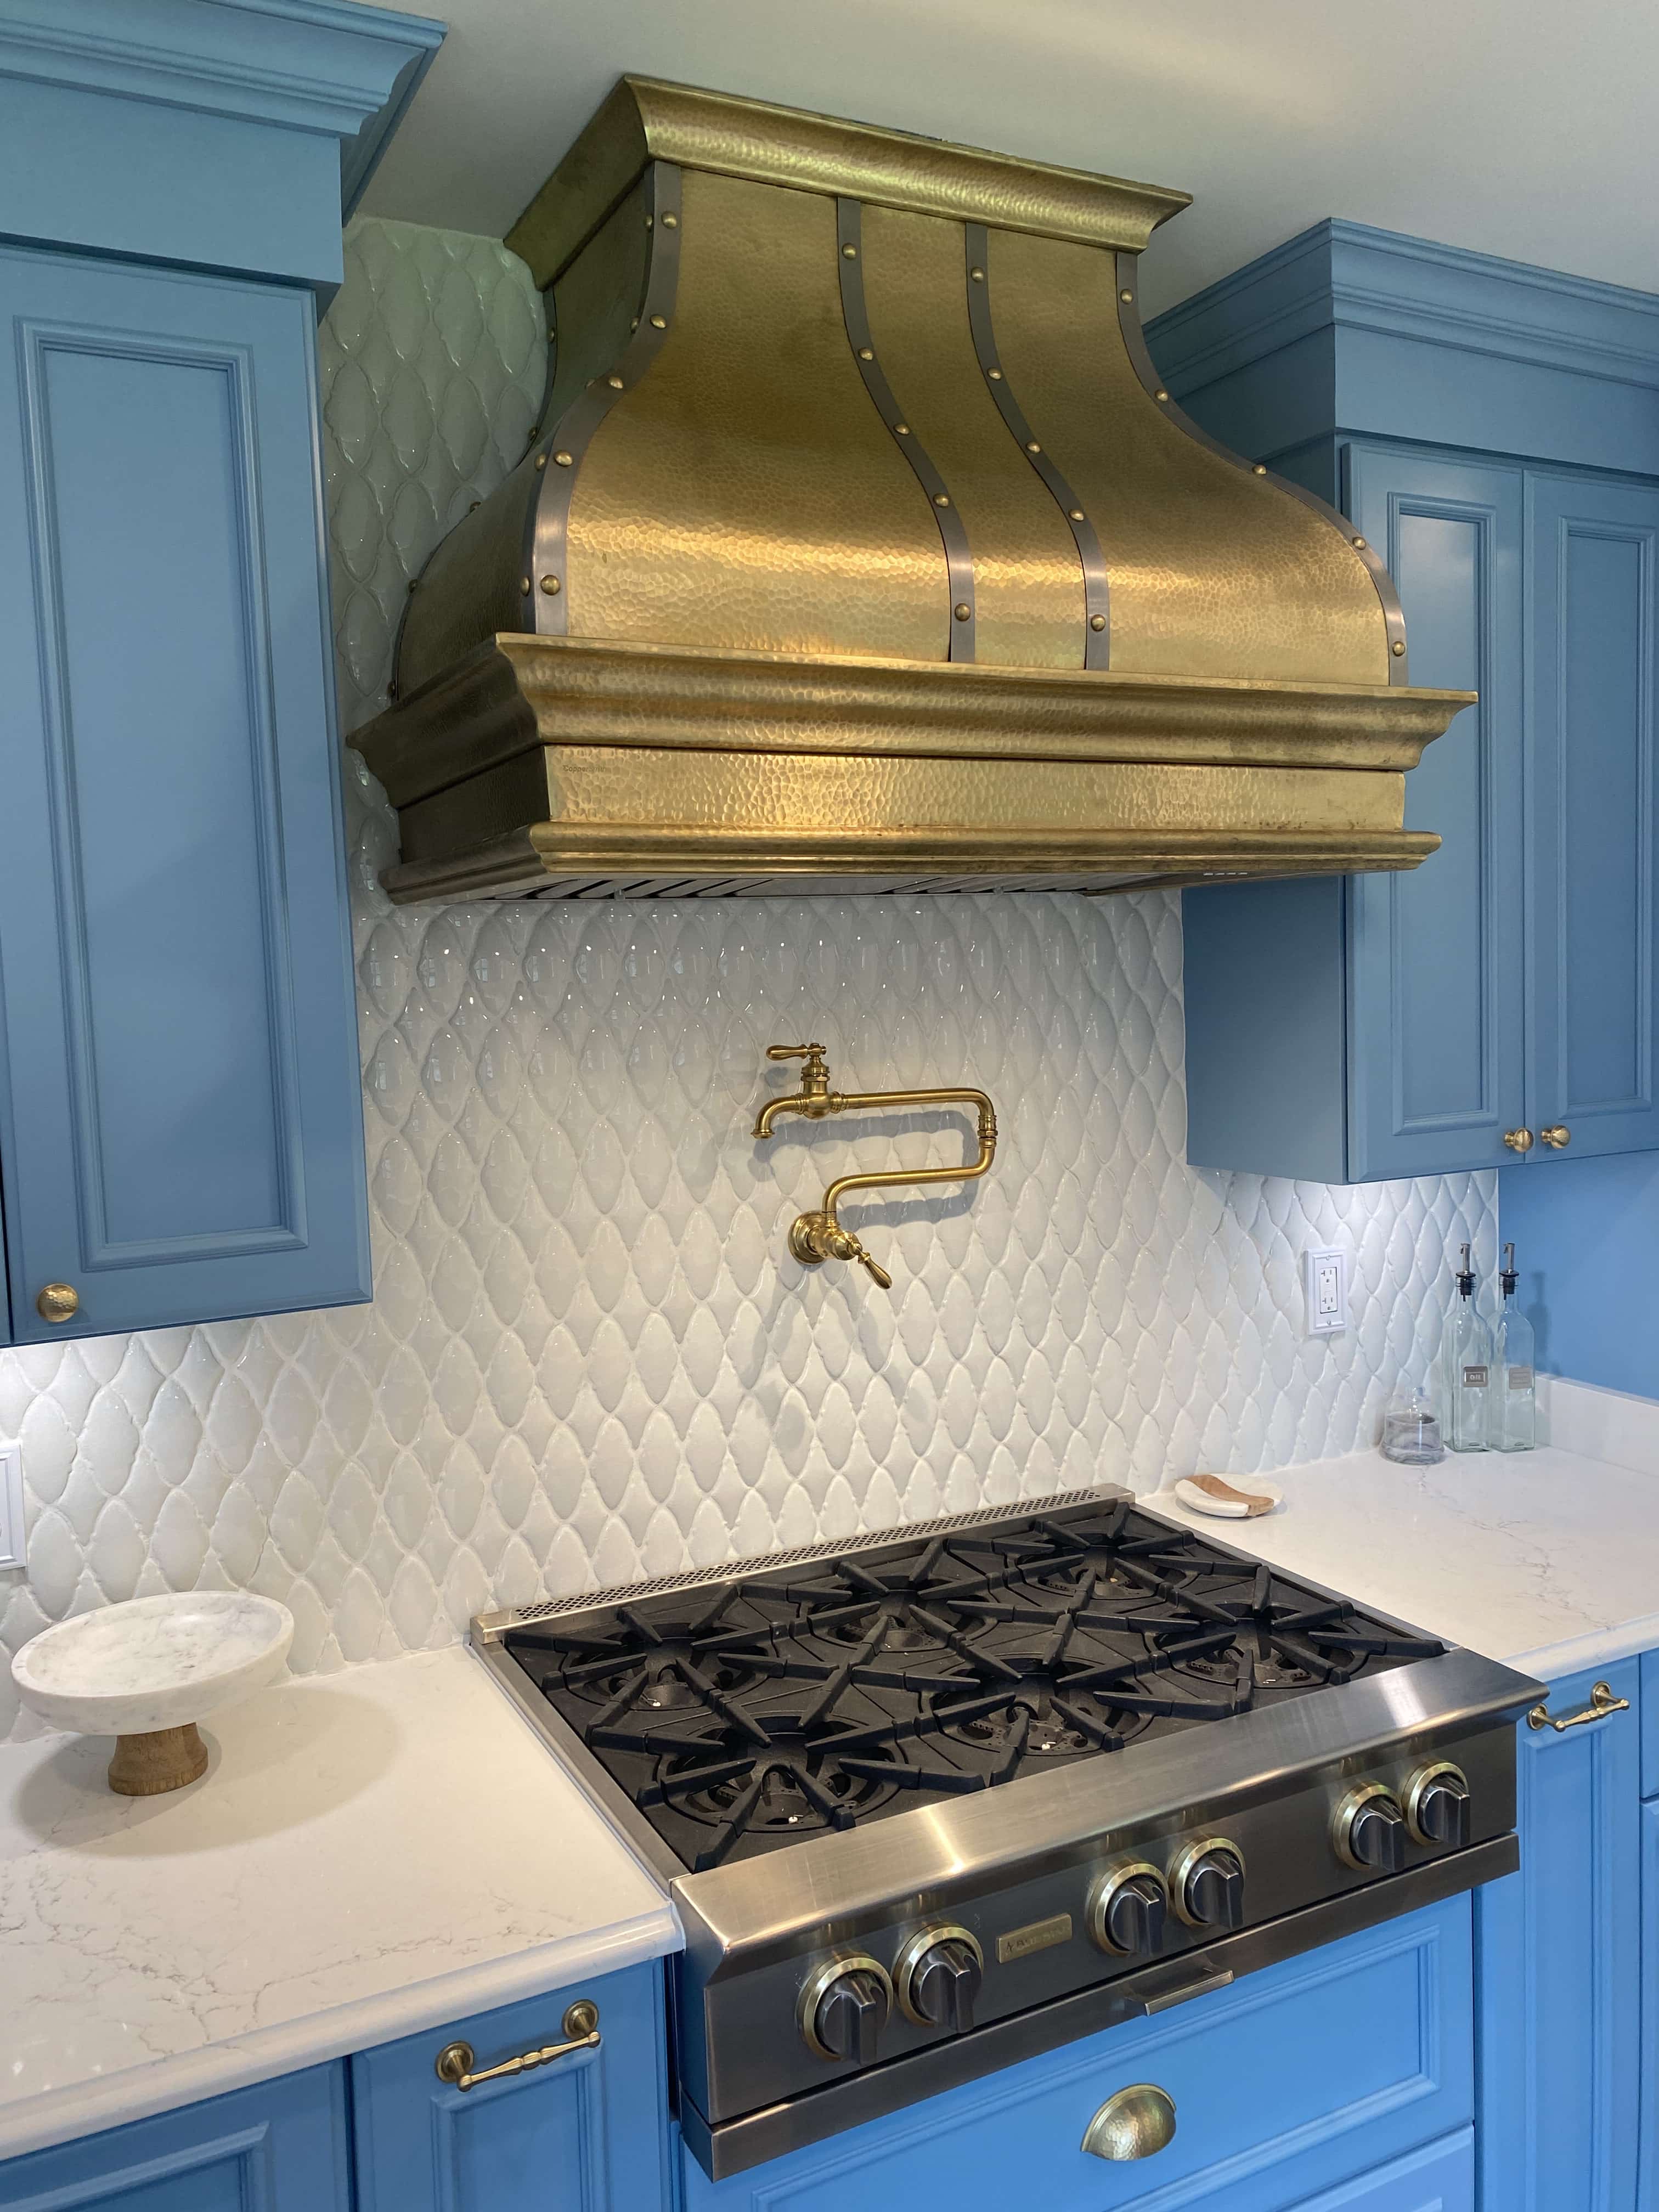 CopperSmith Artisan AT7 Burnished Brass Wall Mount Kitchen Range Hood in a Costal Style kitcvhen with Light Blue cabinets white countertop and white tile backsplash